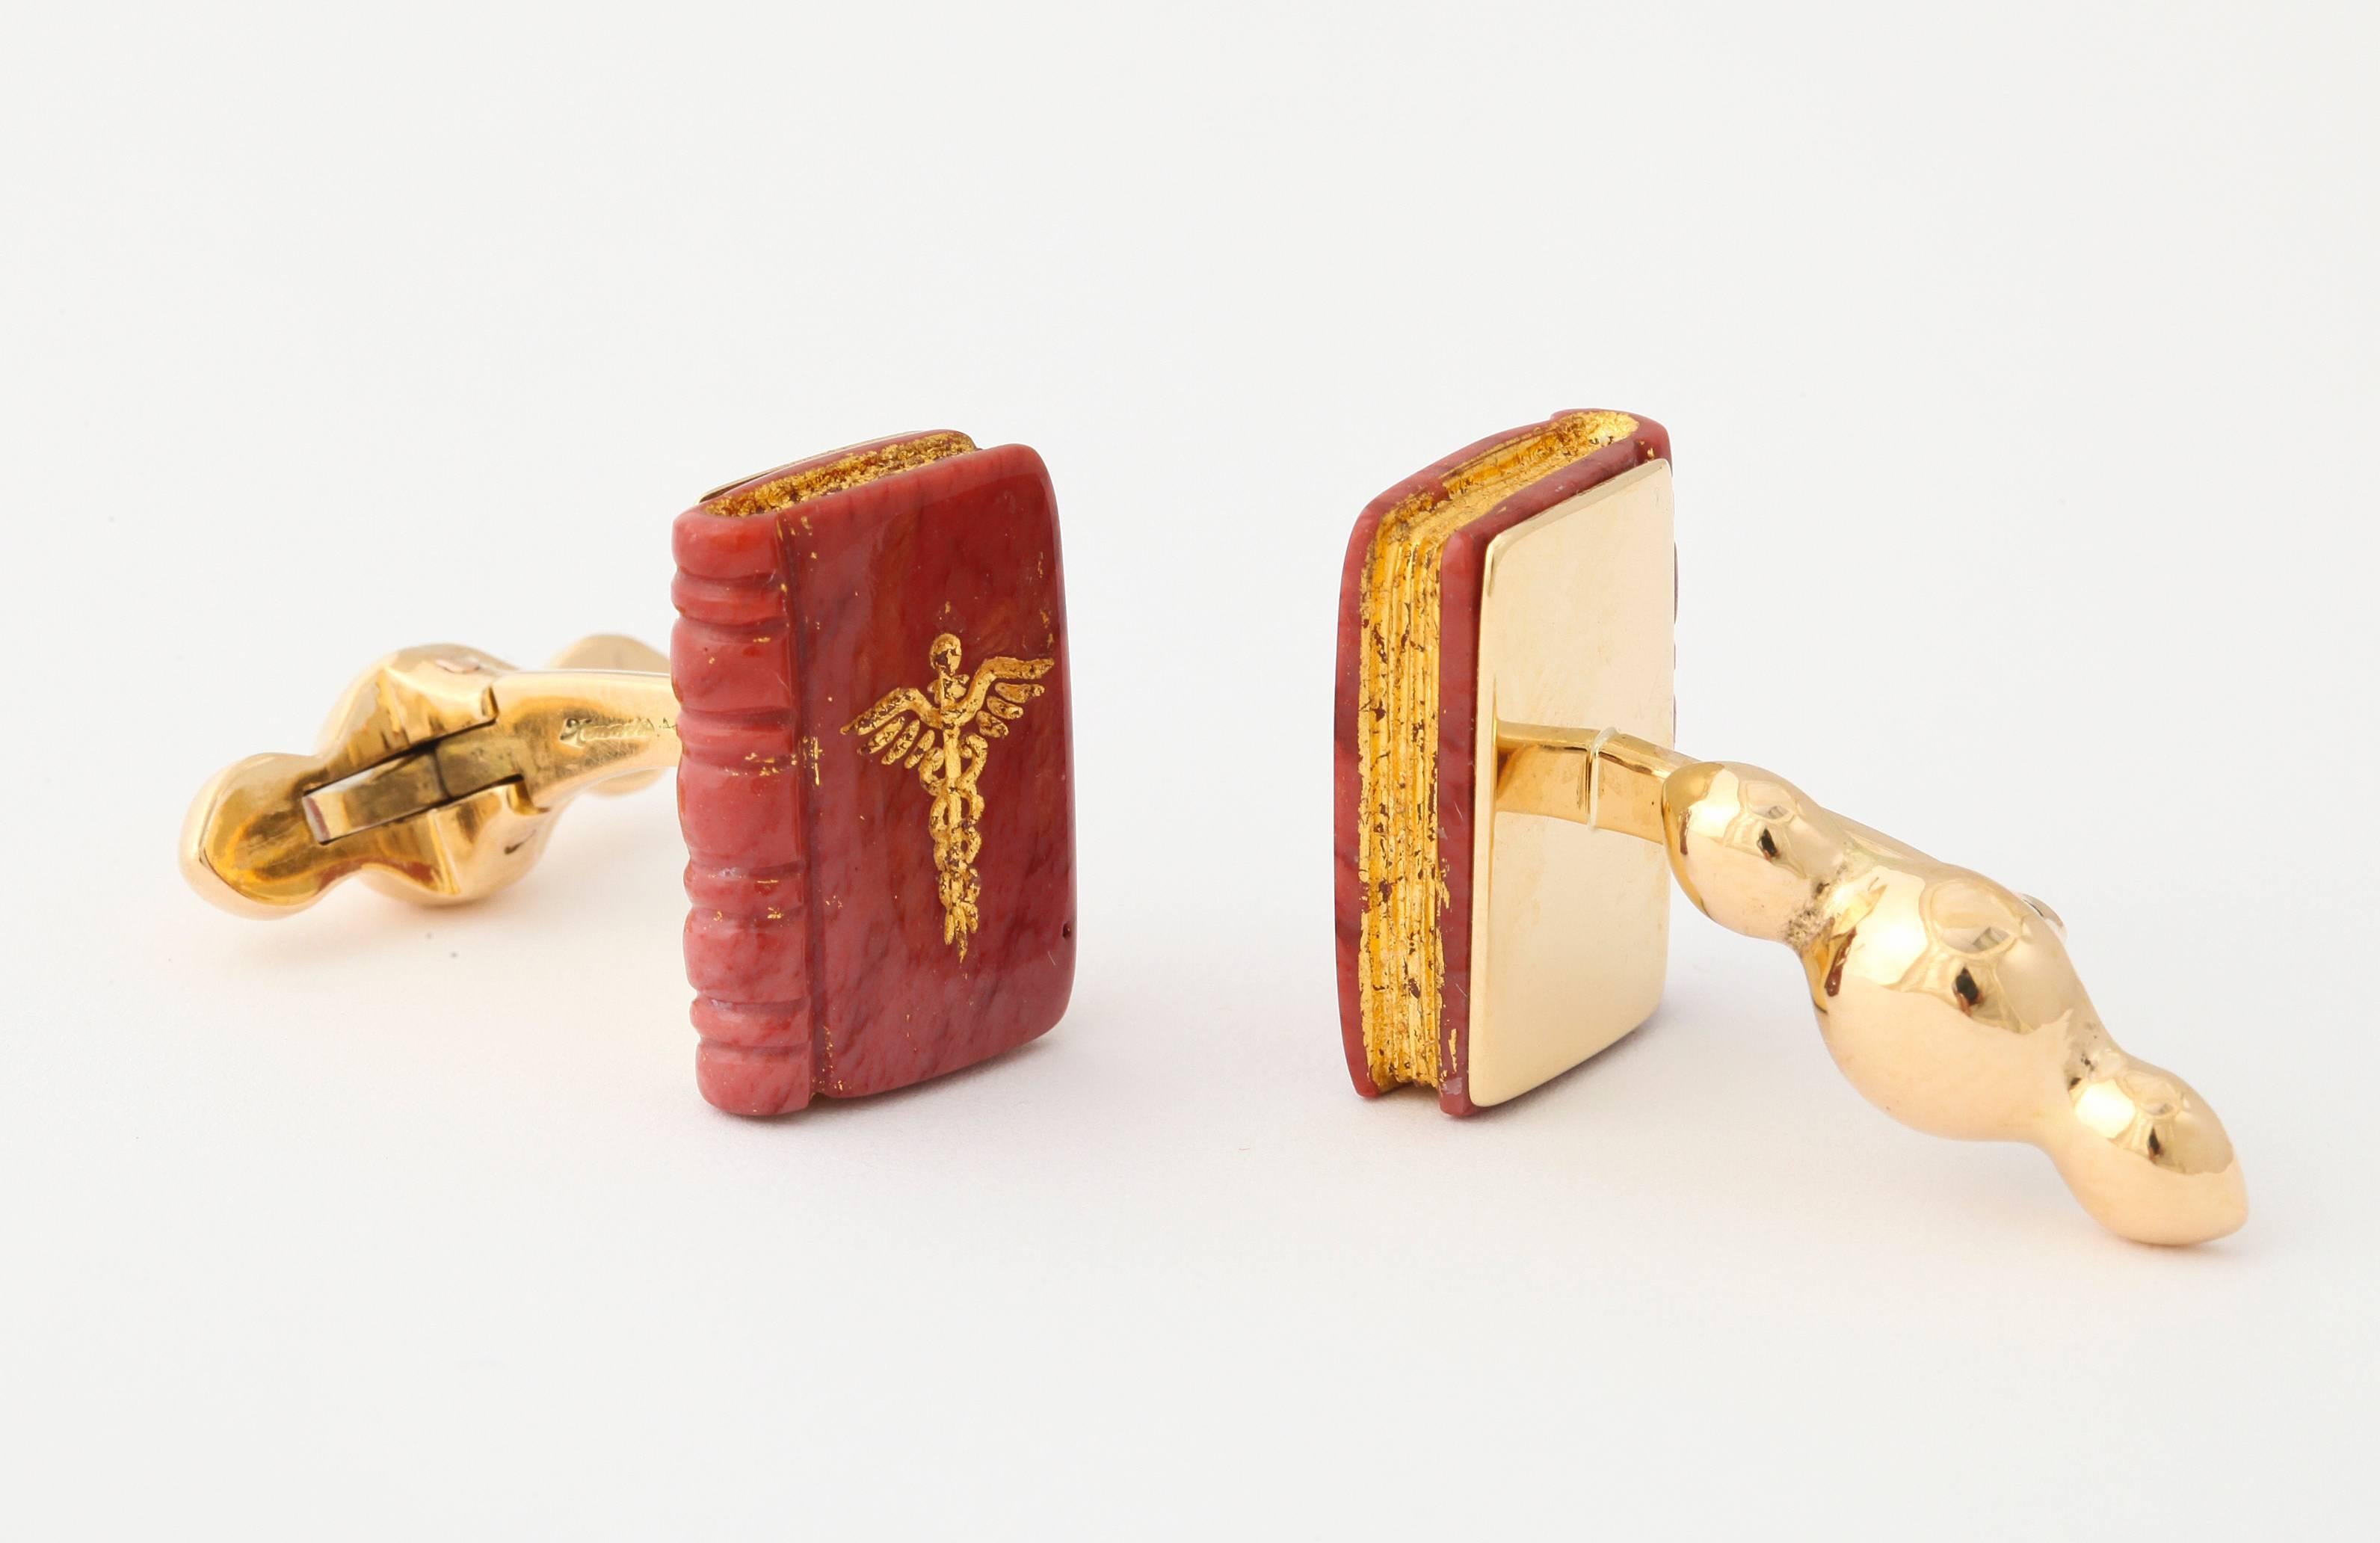 Michael Kanners Carved Stone Caduceus Book Cufflinks In New Condition For Sale In Bal Harbour, FL